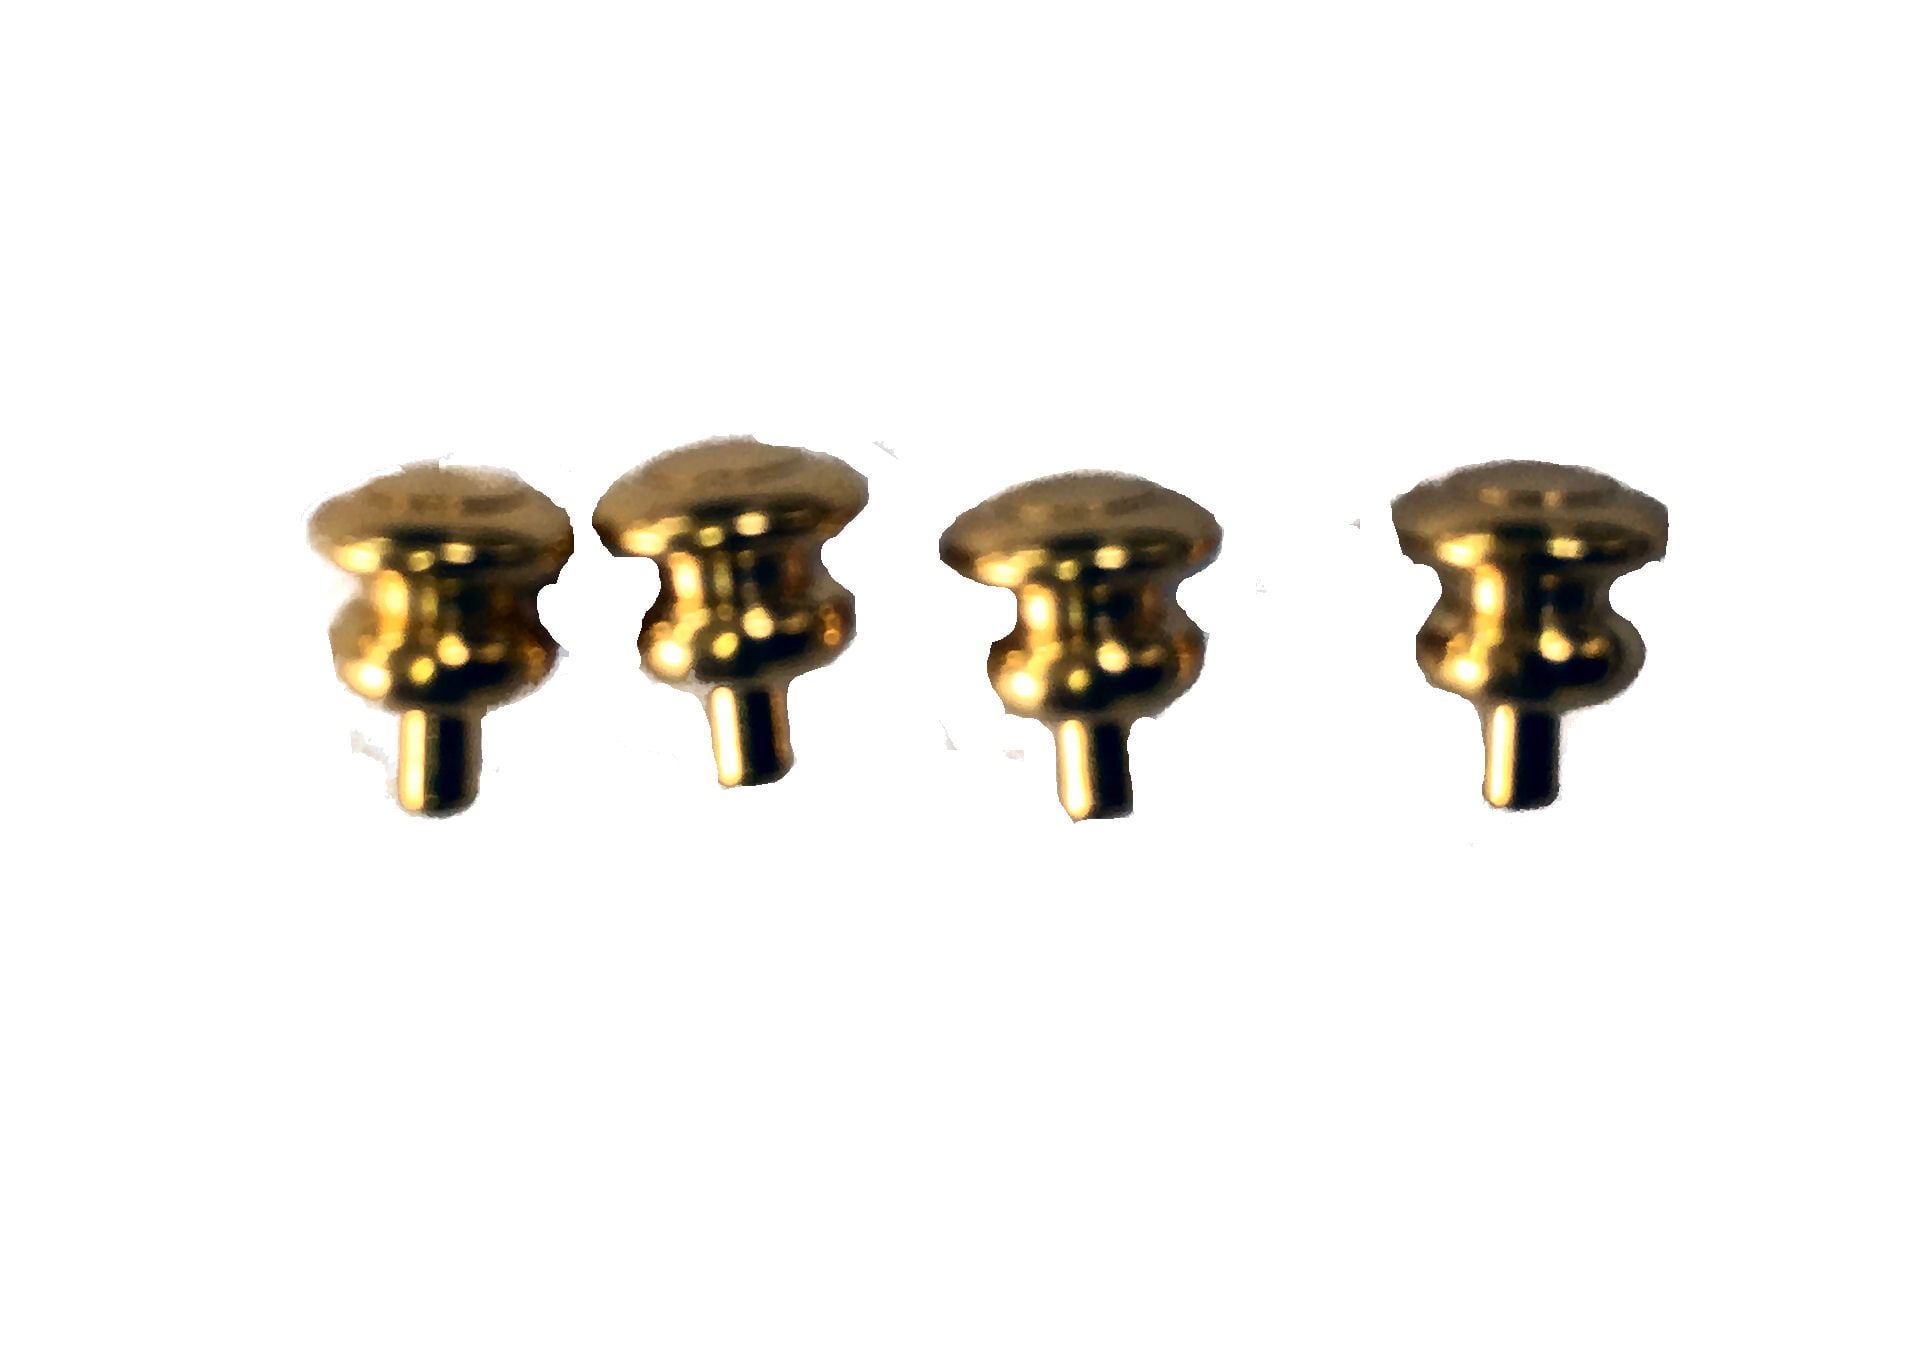 Small Round Door Knobs x 4 for 12th Scale Dolls House